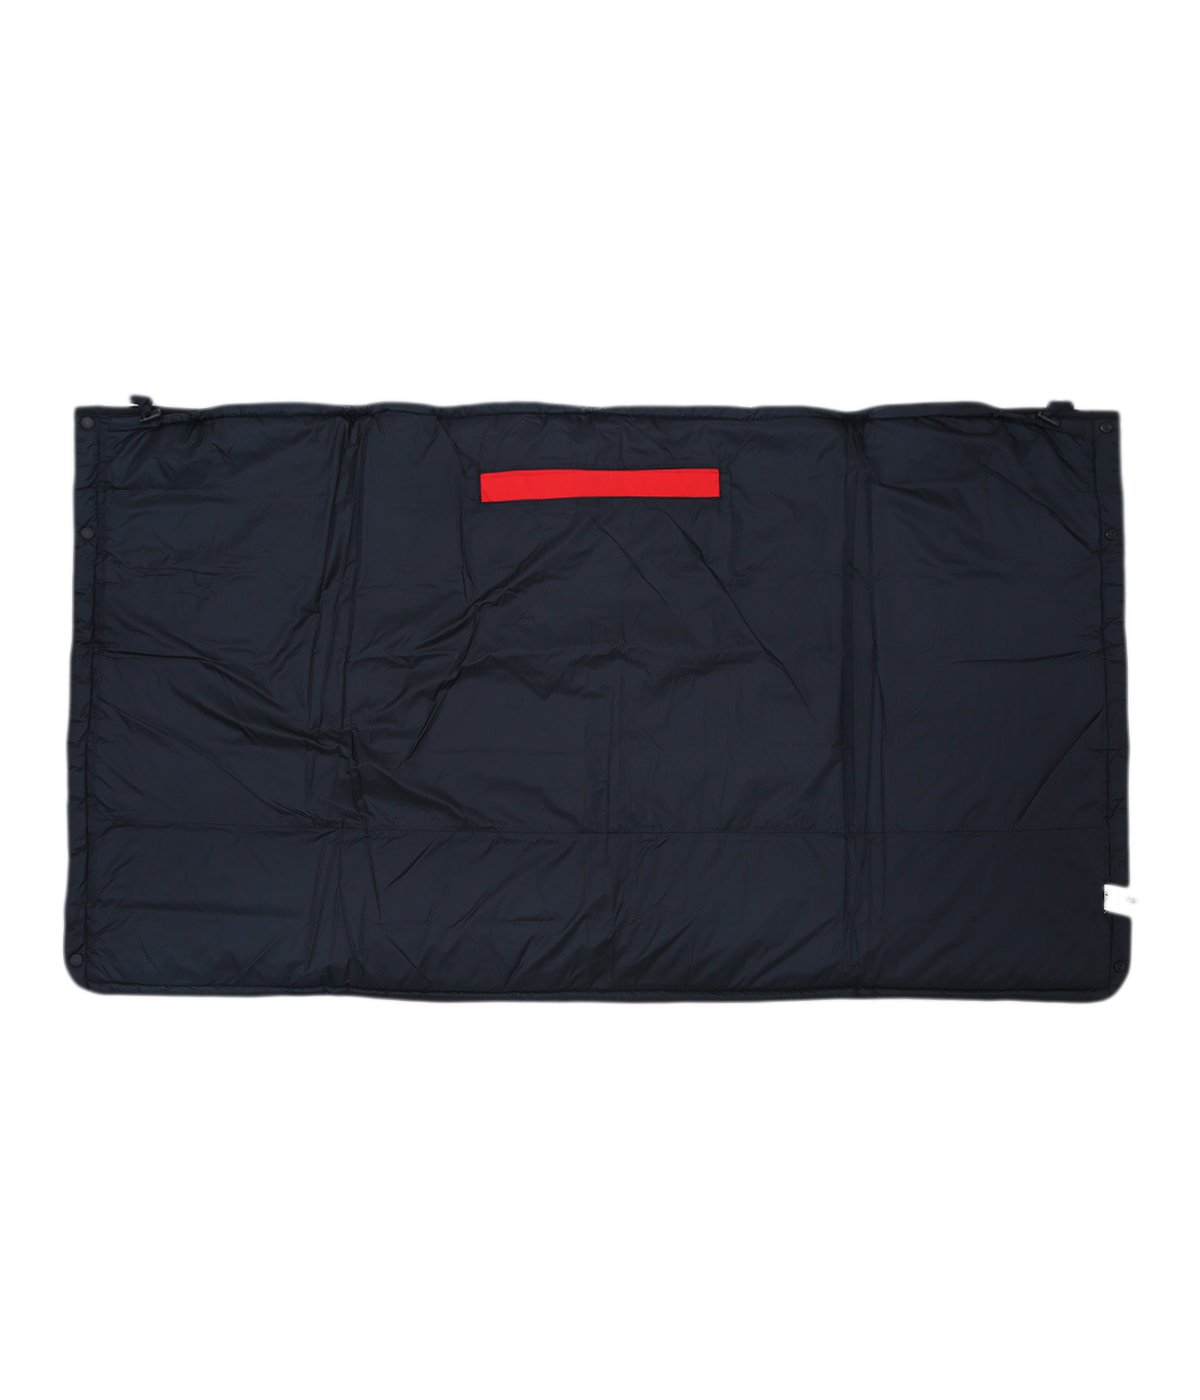 THE NORTH FACE(ザ ノースフェイス) Kids' Starry Shell Blanket 